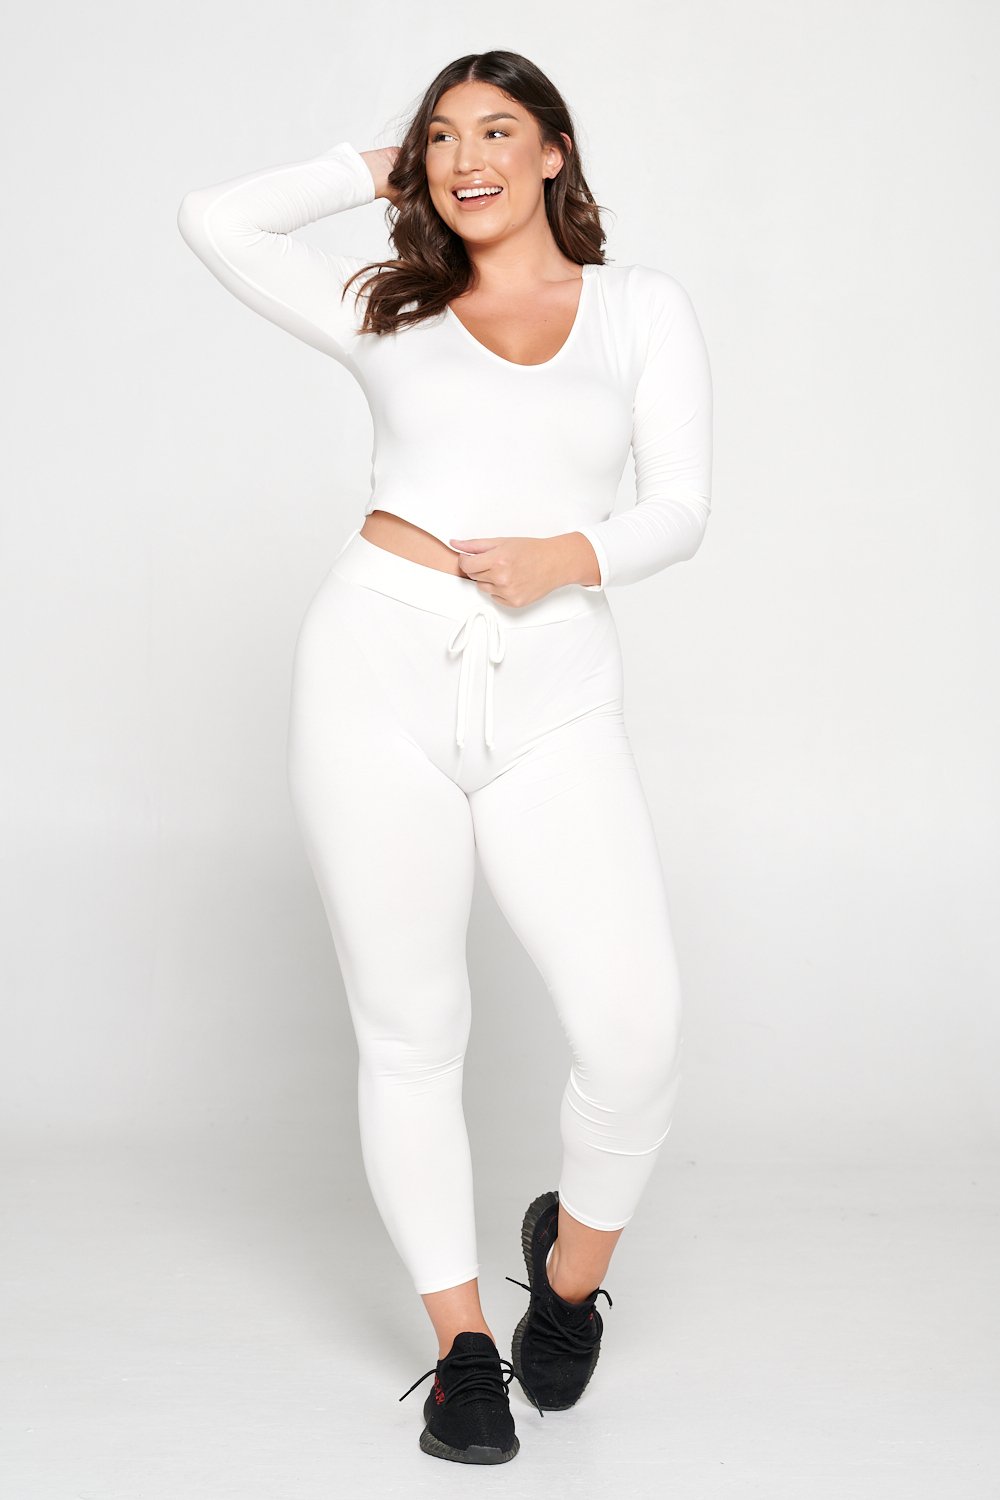 livd L I V D women's contemporary plus size  scoop neck crop hoodie and elastic band sweatpant with faux drawstring in off white